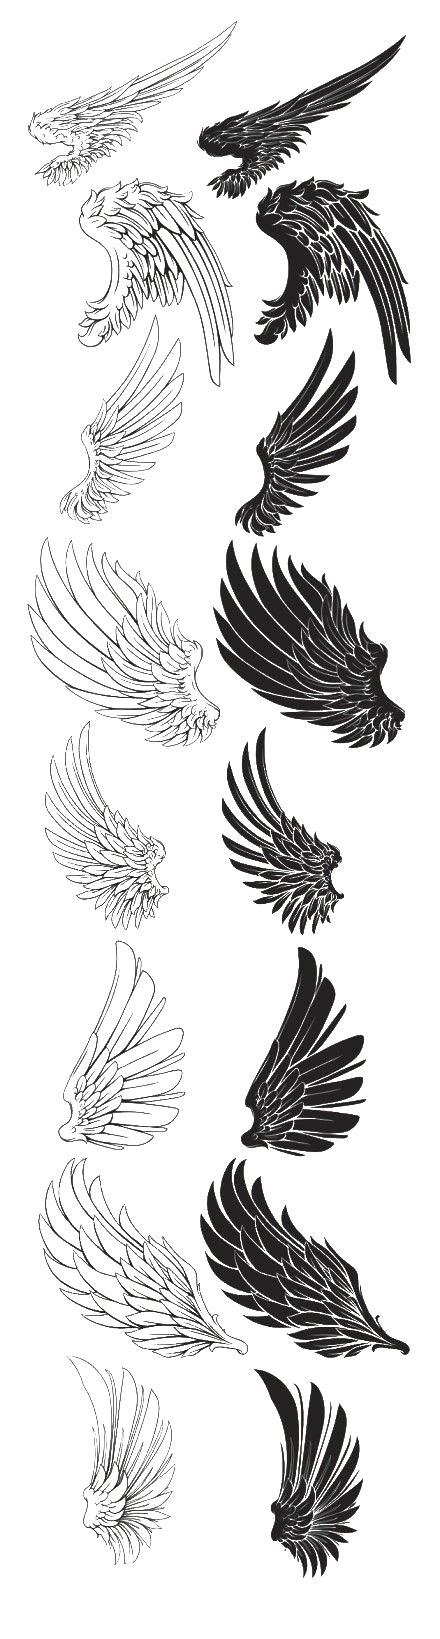 Eagle Feather Drawing Wings Brush Free Download PNG HQ Transparent HQ PNG Download | FreePNGImg